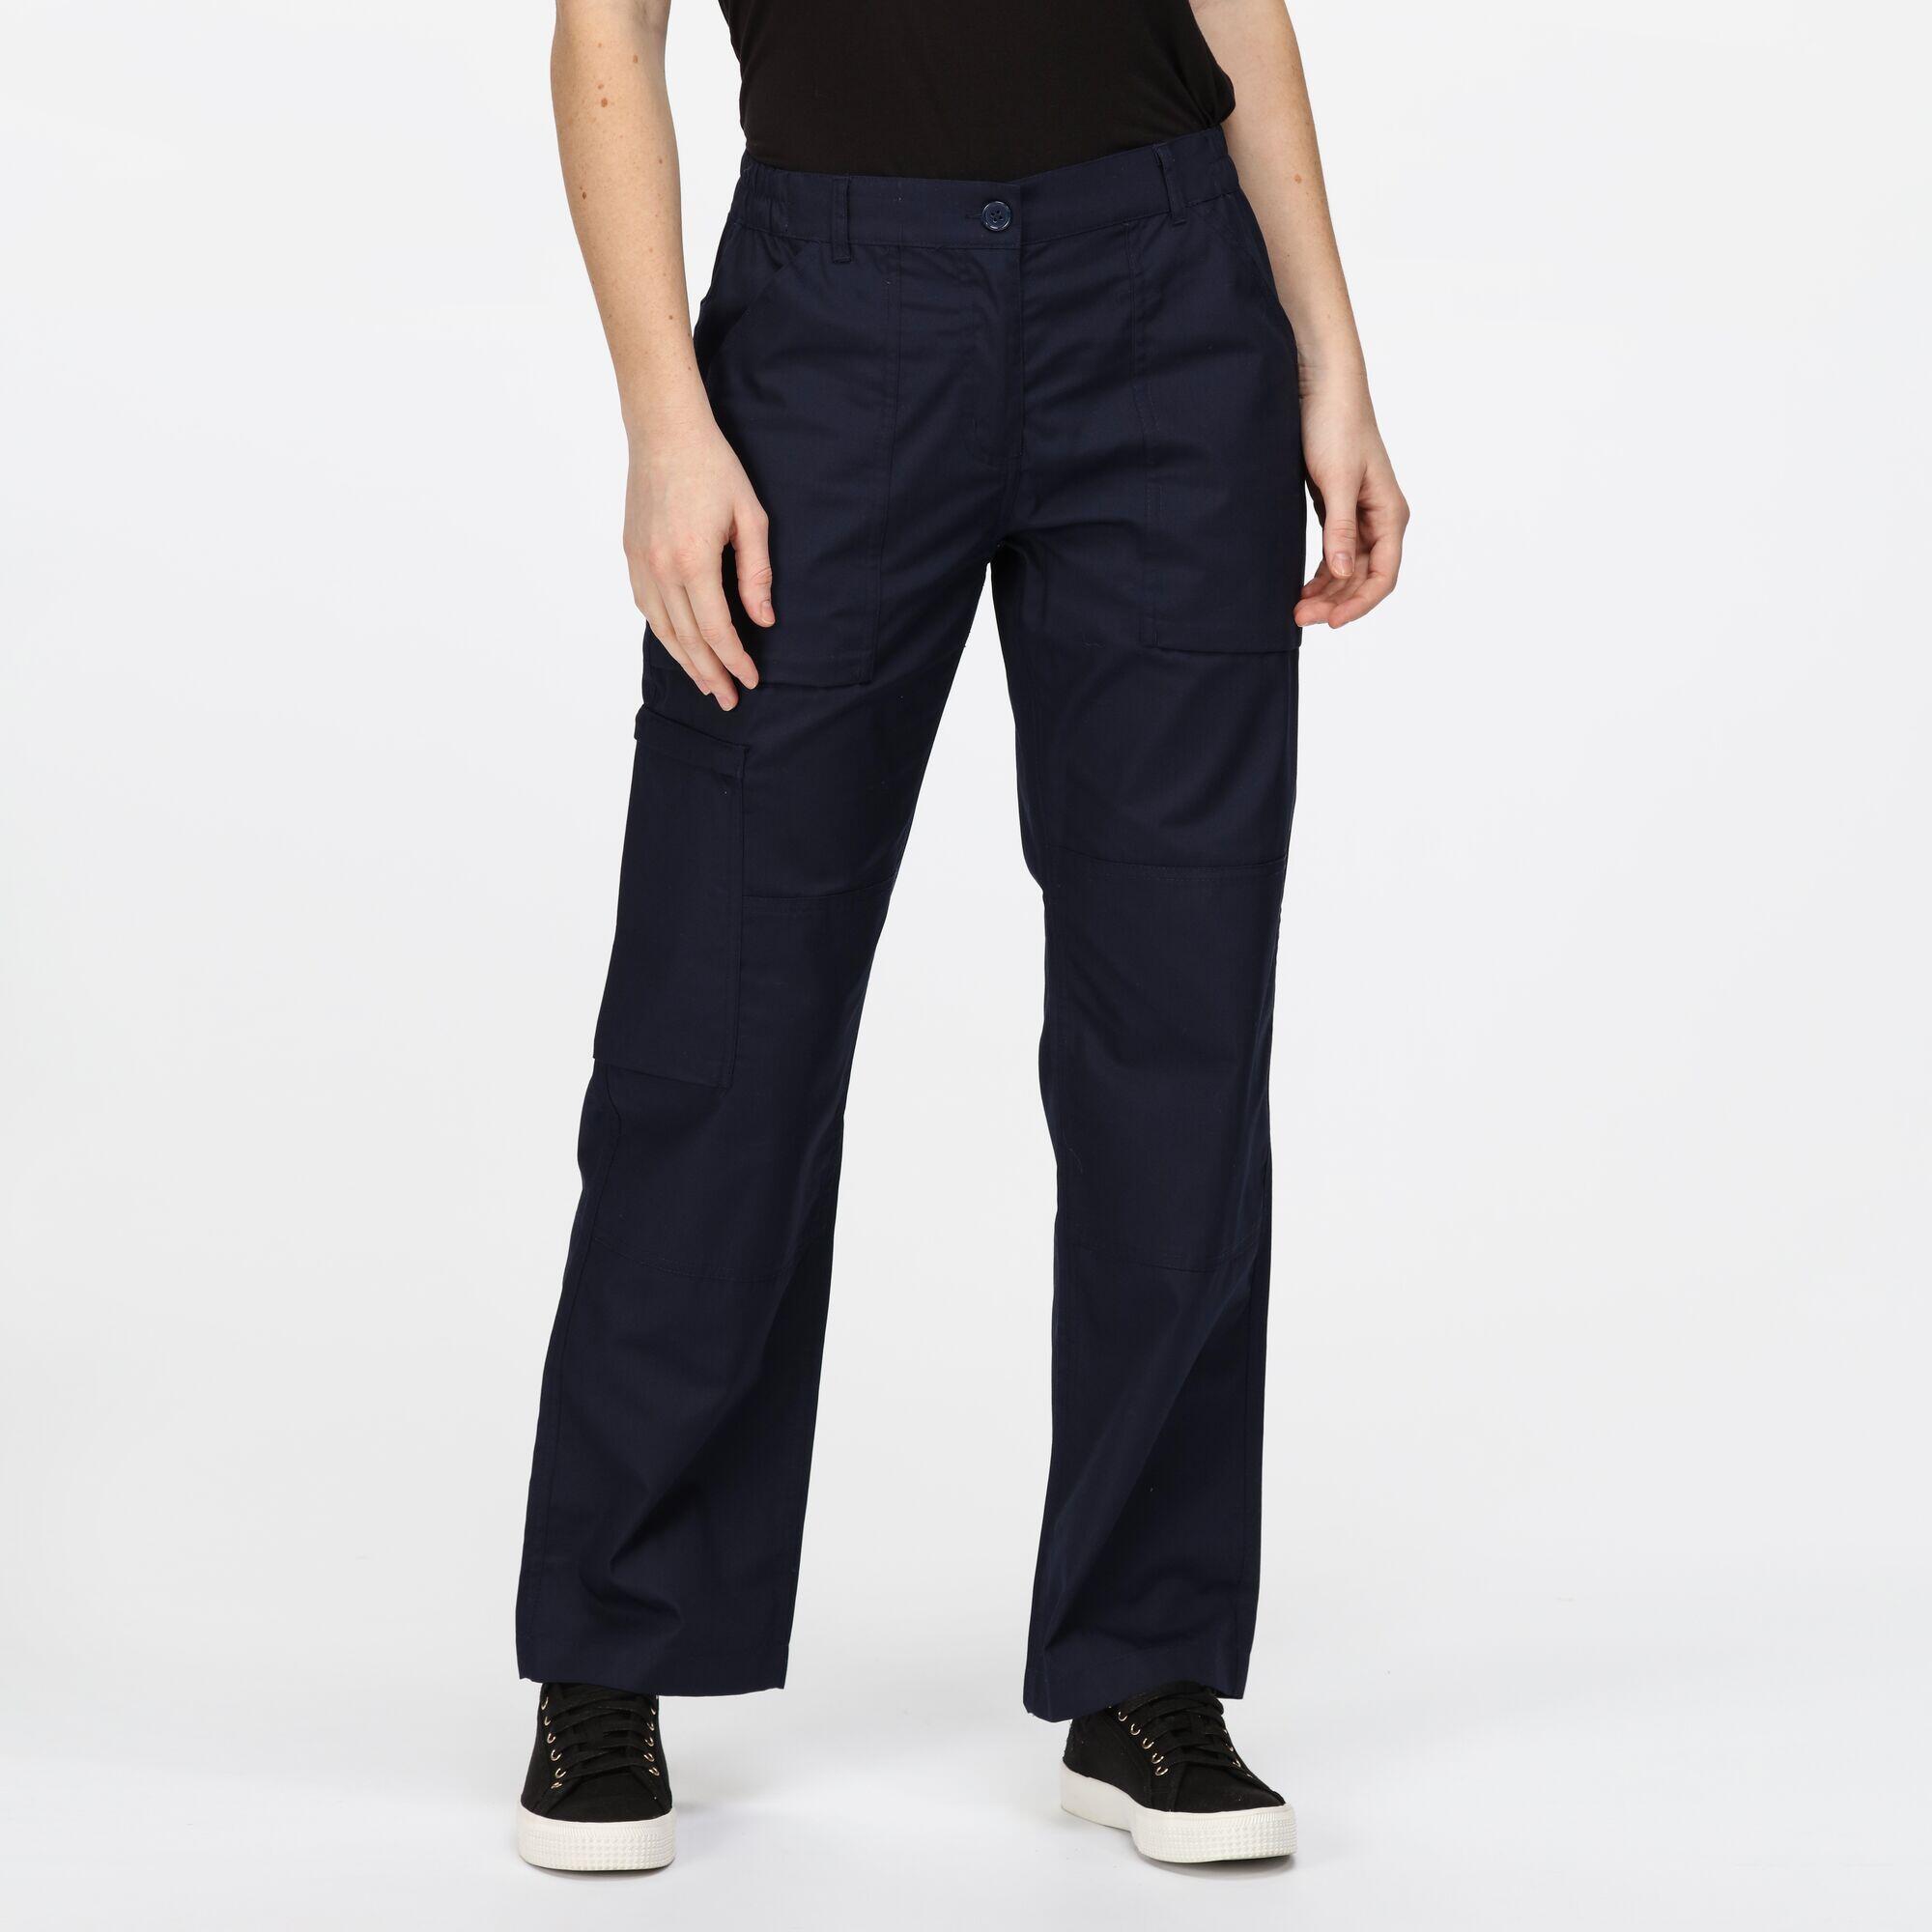 Womens/Ladies New Action Water Repellent Trousers (Navy) 4/5